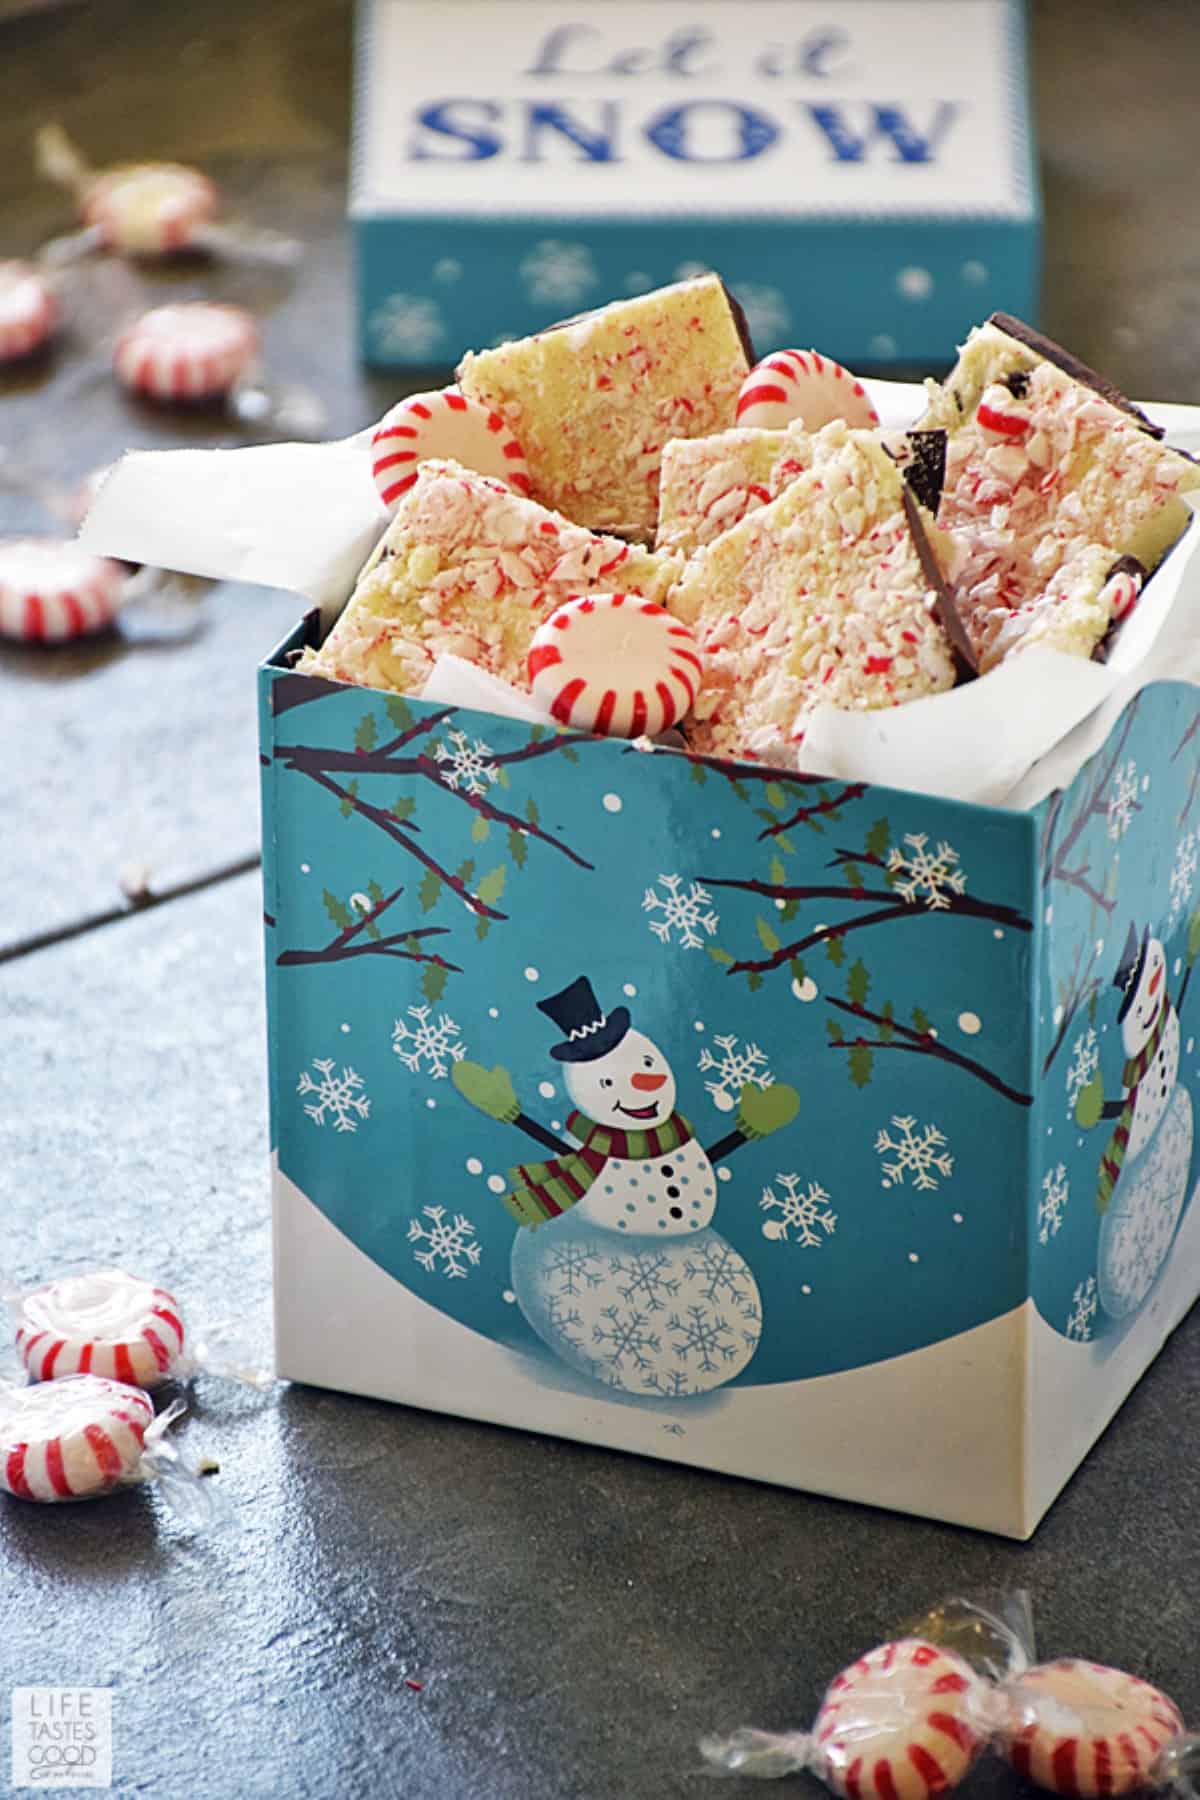 Peppermint Bark Candy in a Christmas box with a snowman on it.